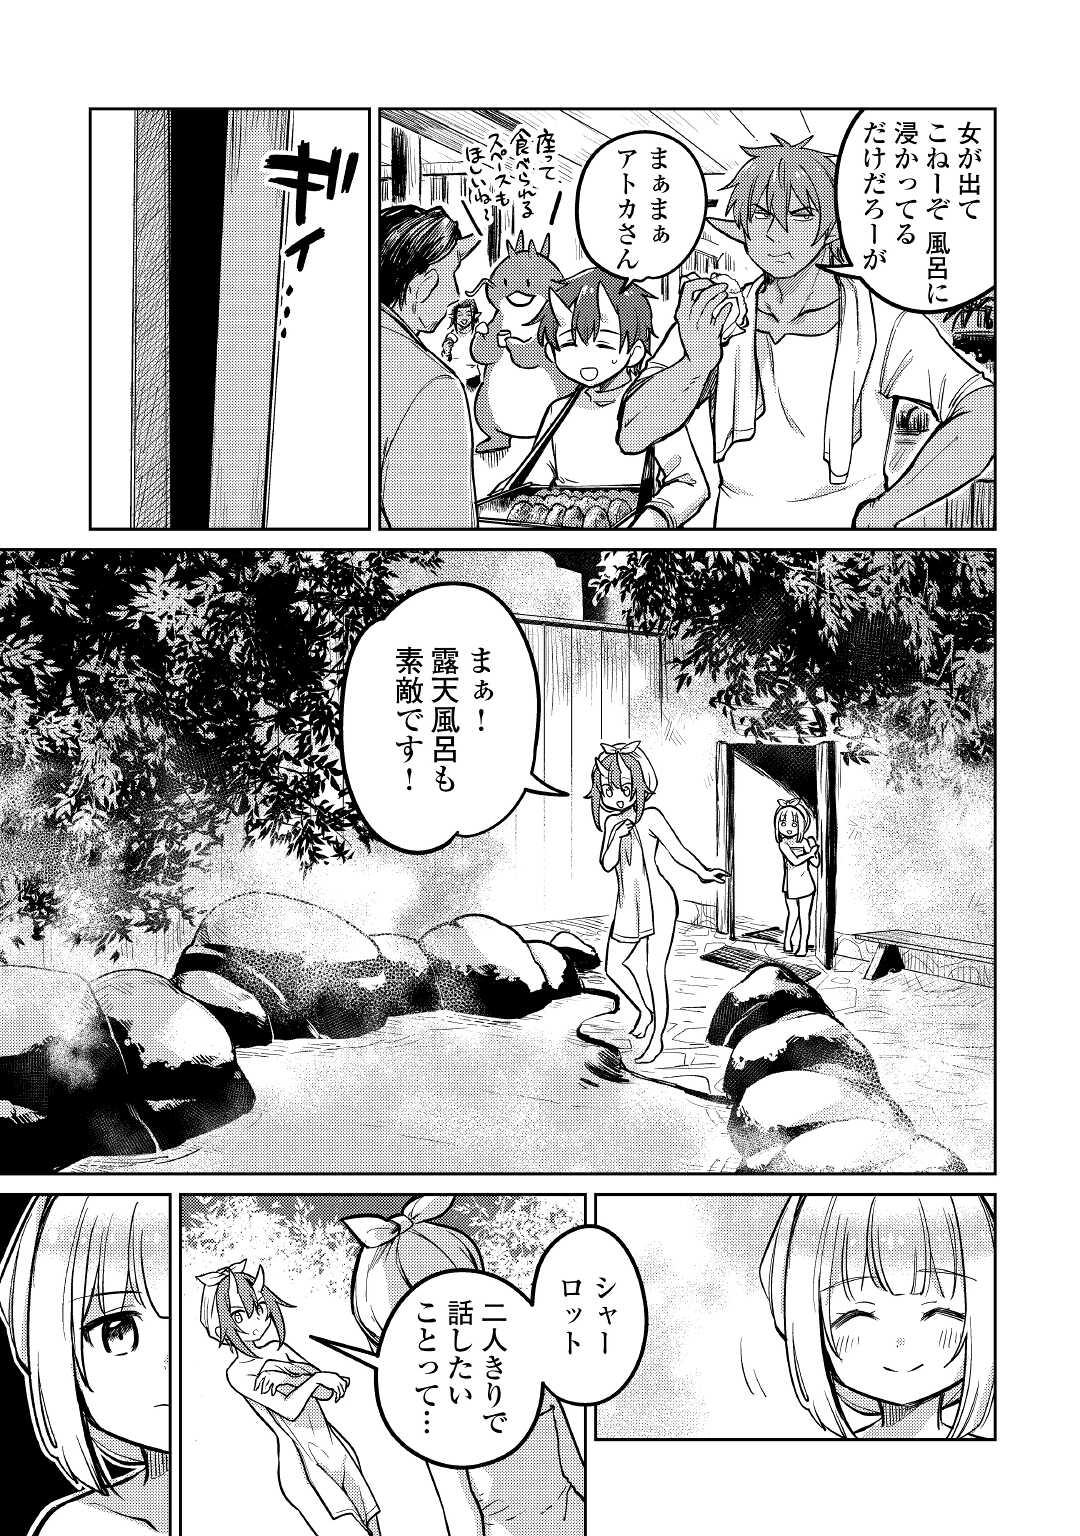 The Former Structural Researcher’s Story of Otherworldly Adventure 第41話 - Page 9